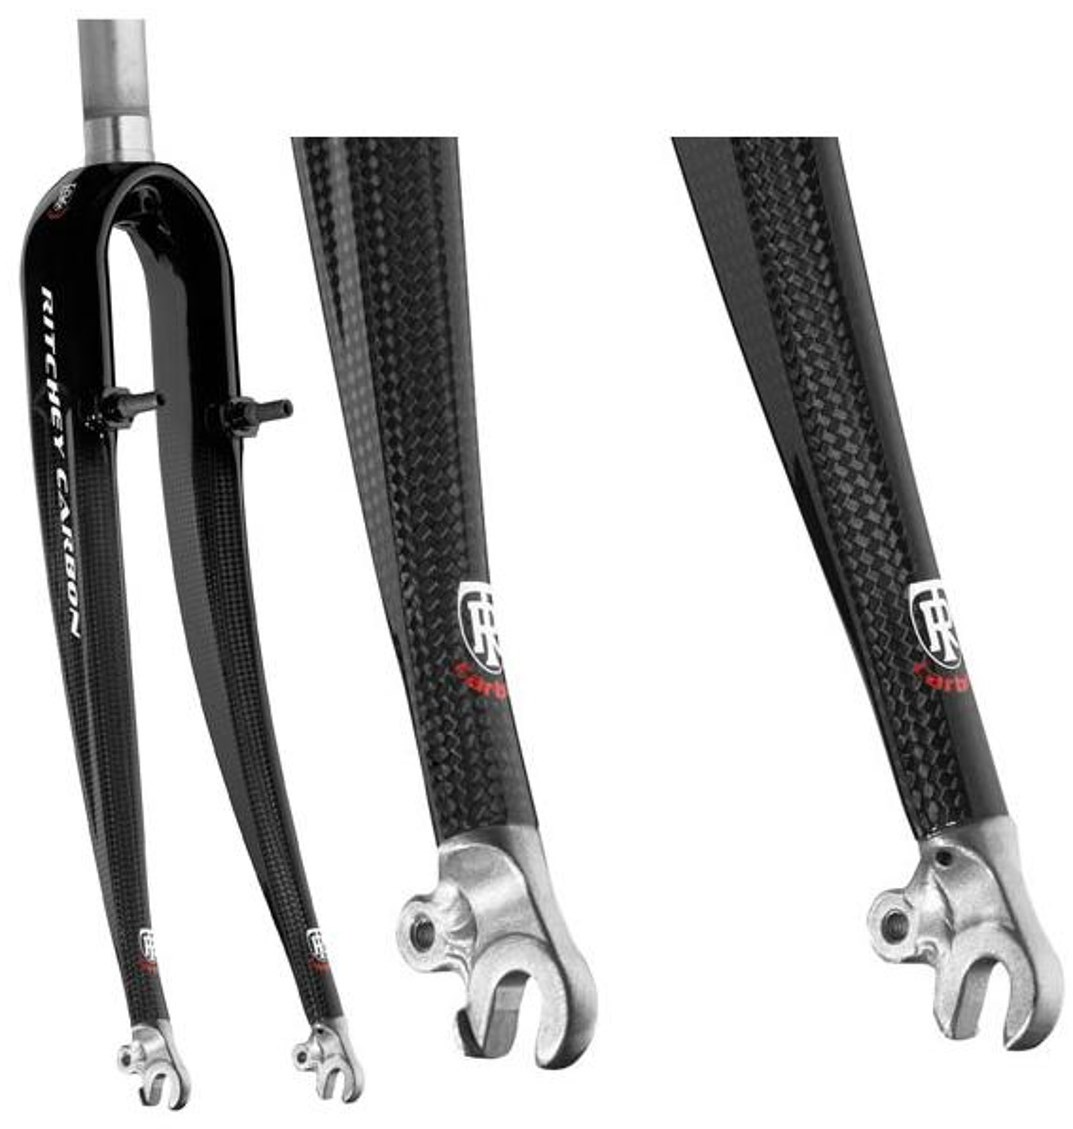 Ritchey Comp Carbon Cross Fork 2011 product image